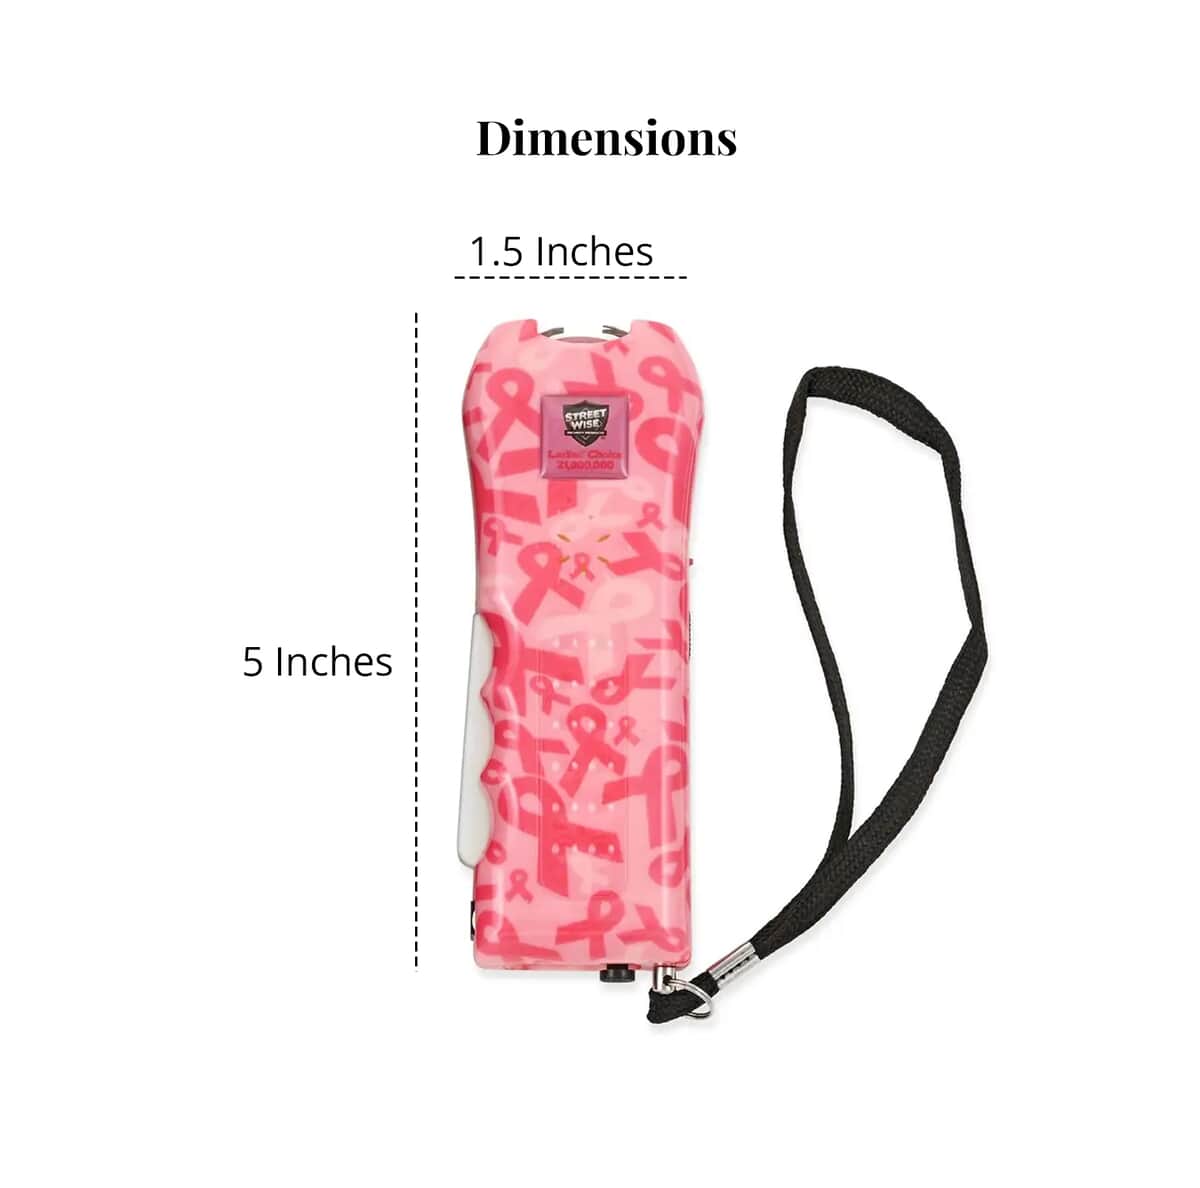 Streetwise Pink Cancer Awareness Ribbon Stun Gun with Flash Light, Alarm and Carry Case (5x1.5) image number 7